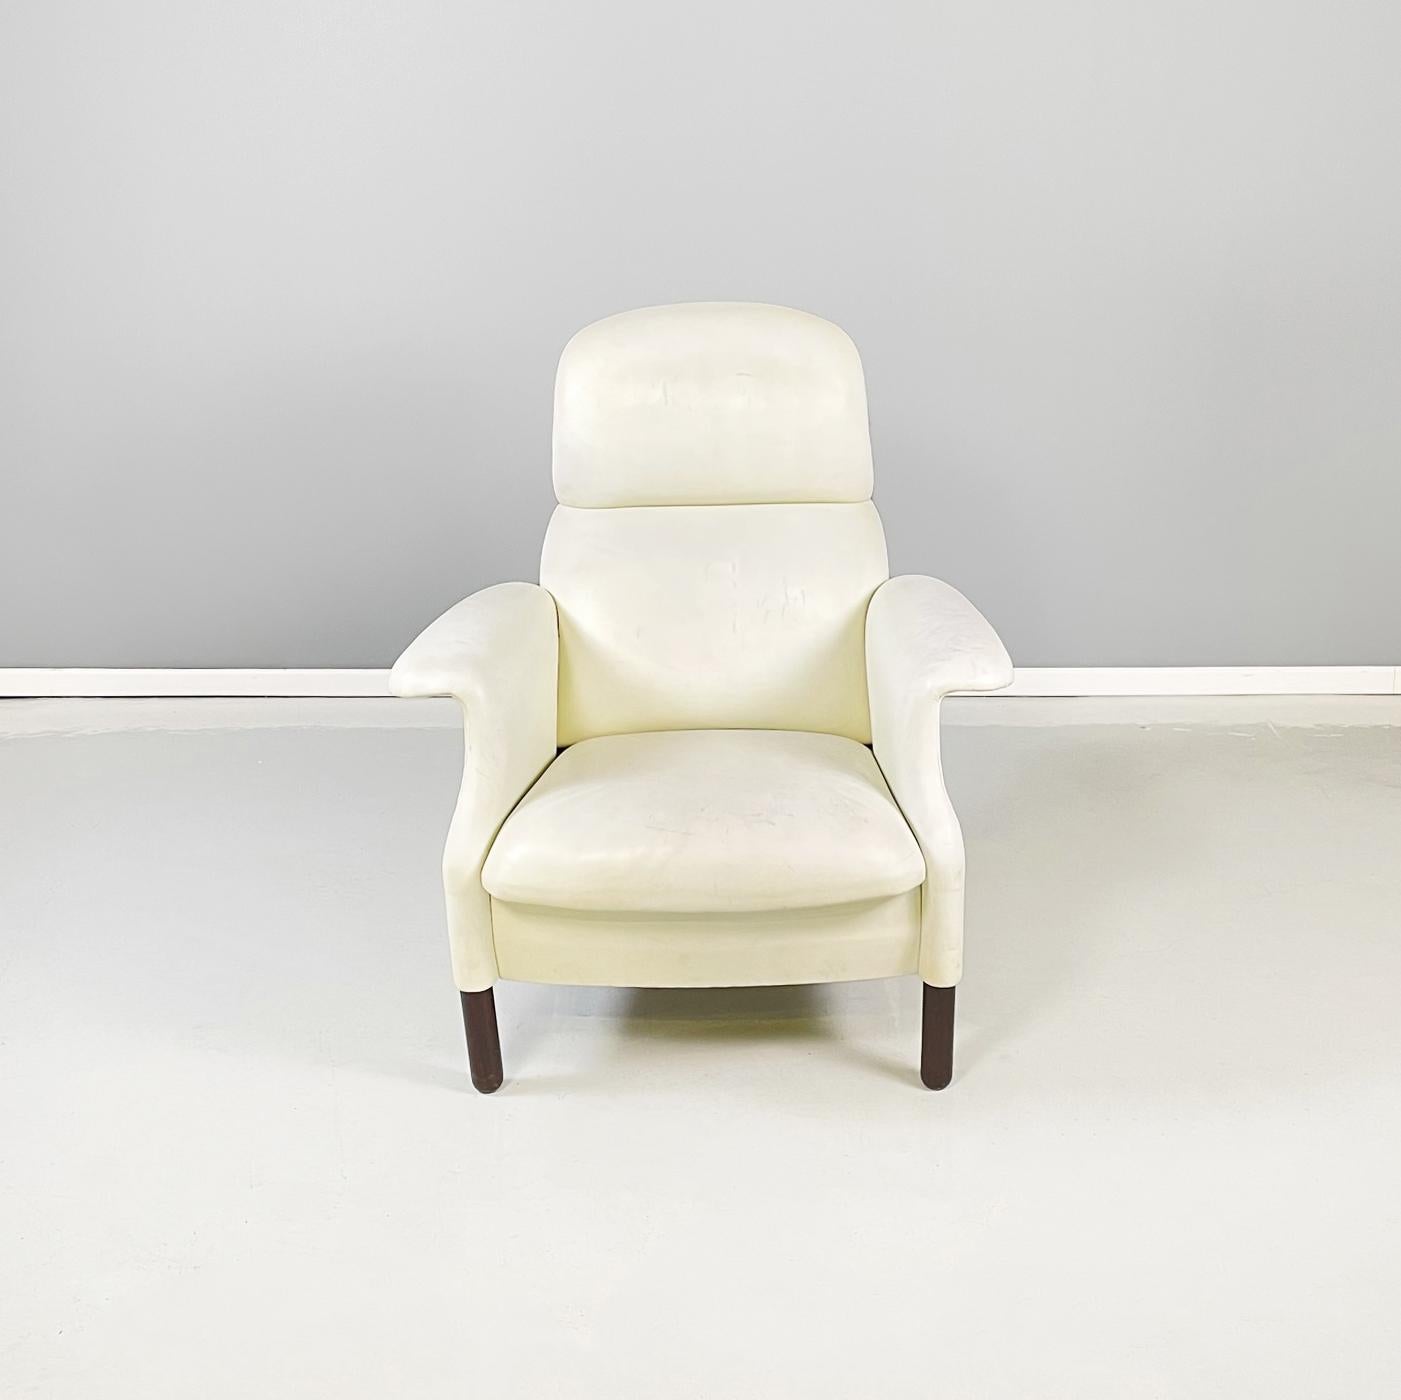 Italian Mid-Century Modern Armchair mod. Sanluca by Pier Giacomo and Achille Castiglioni for Gavina, 1960s
Elegant armchair mod. Sanluca in white leather. Squared padded seat. The iconic backrest is made up of two arches. Curved armrests.